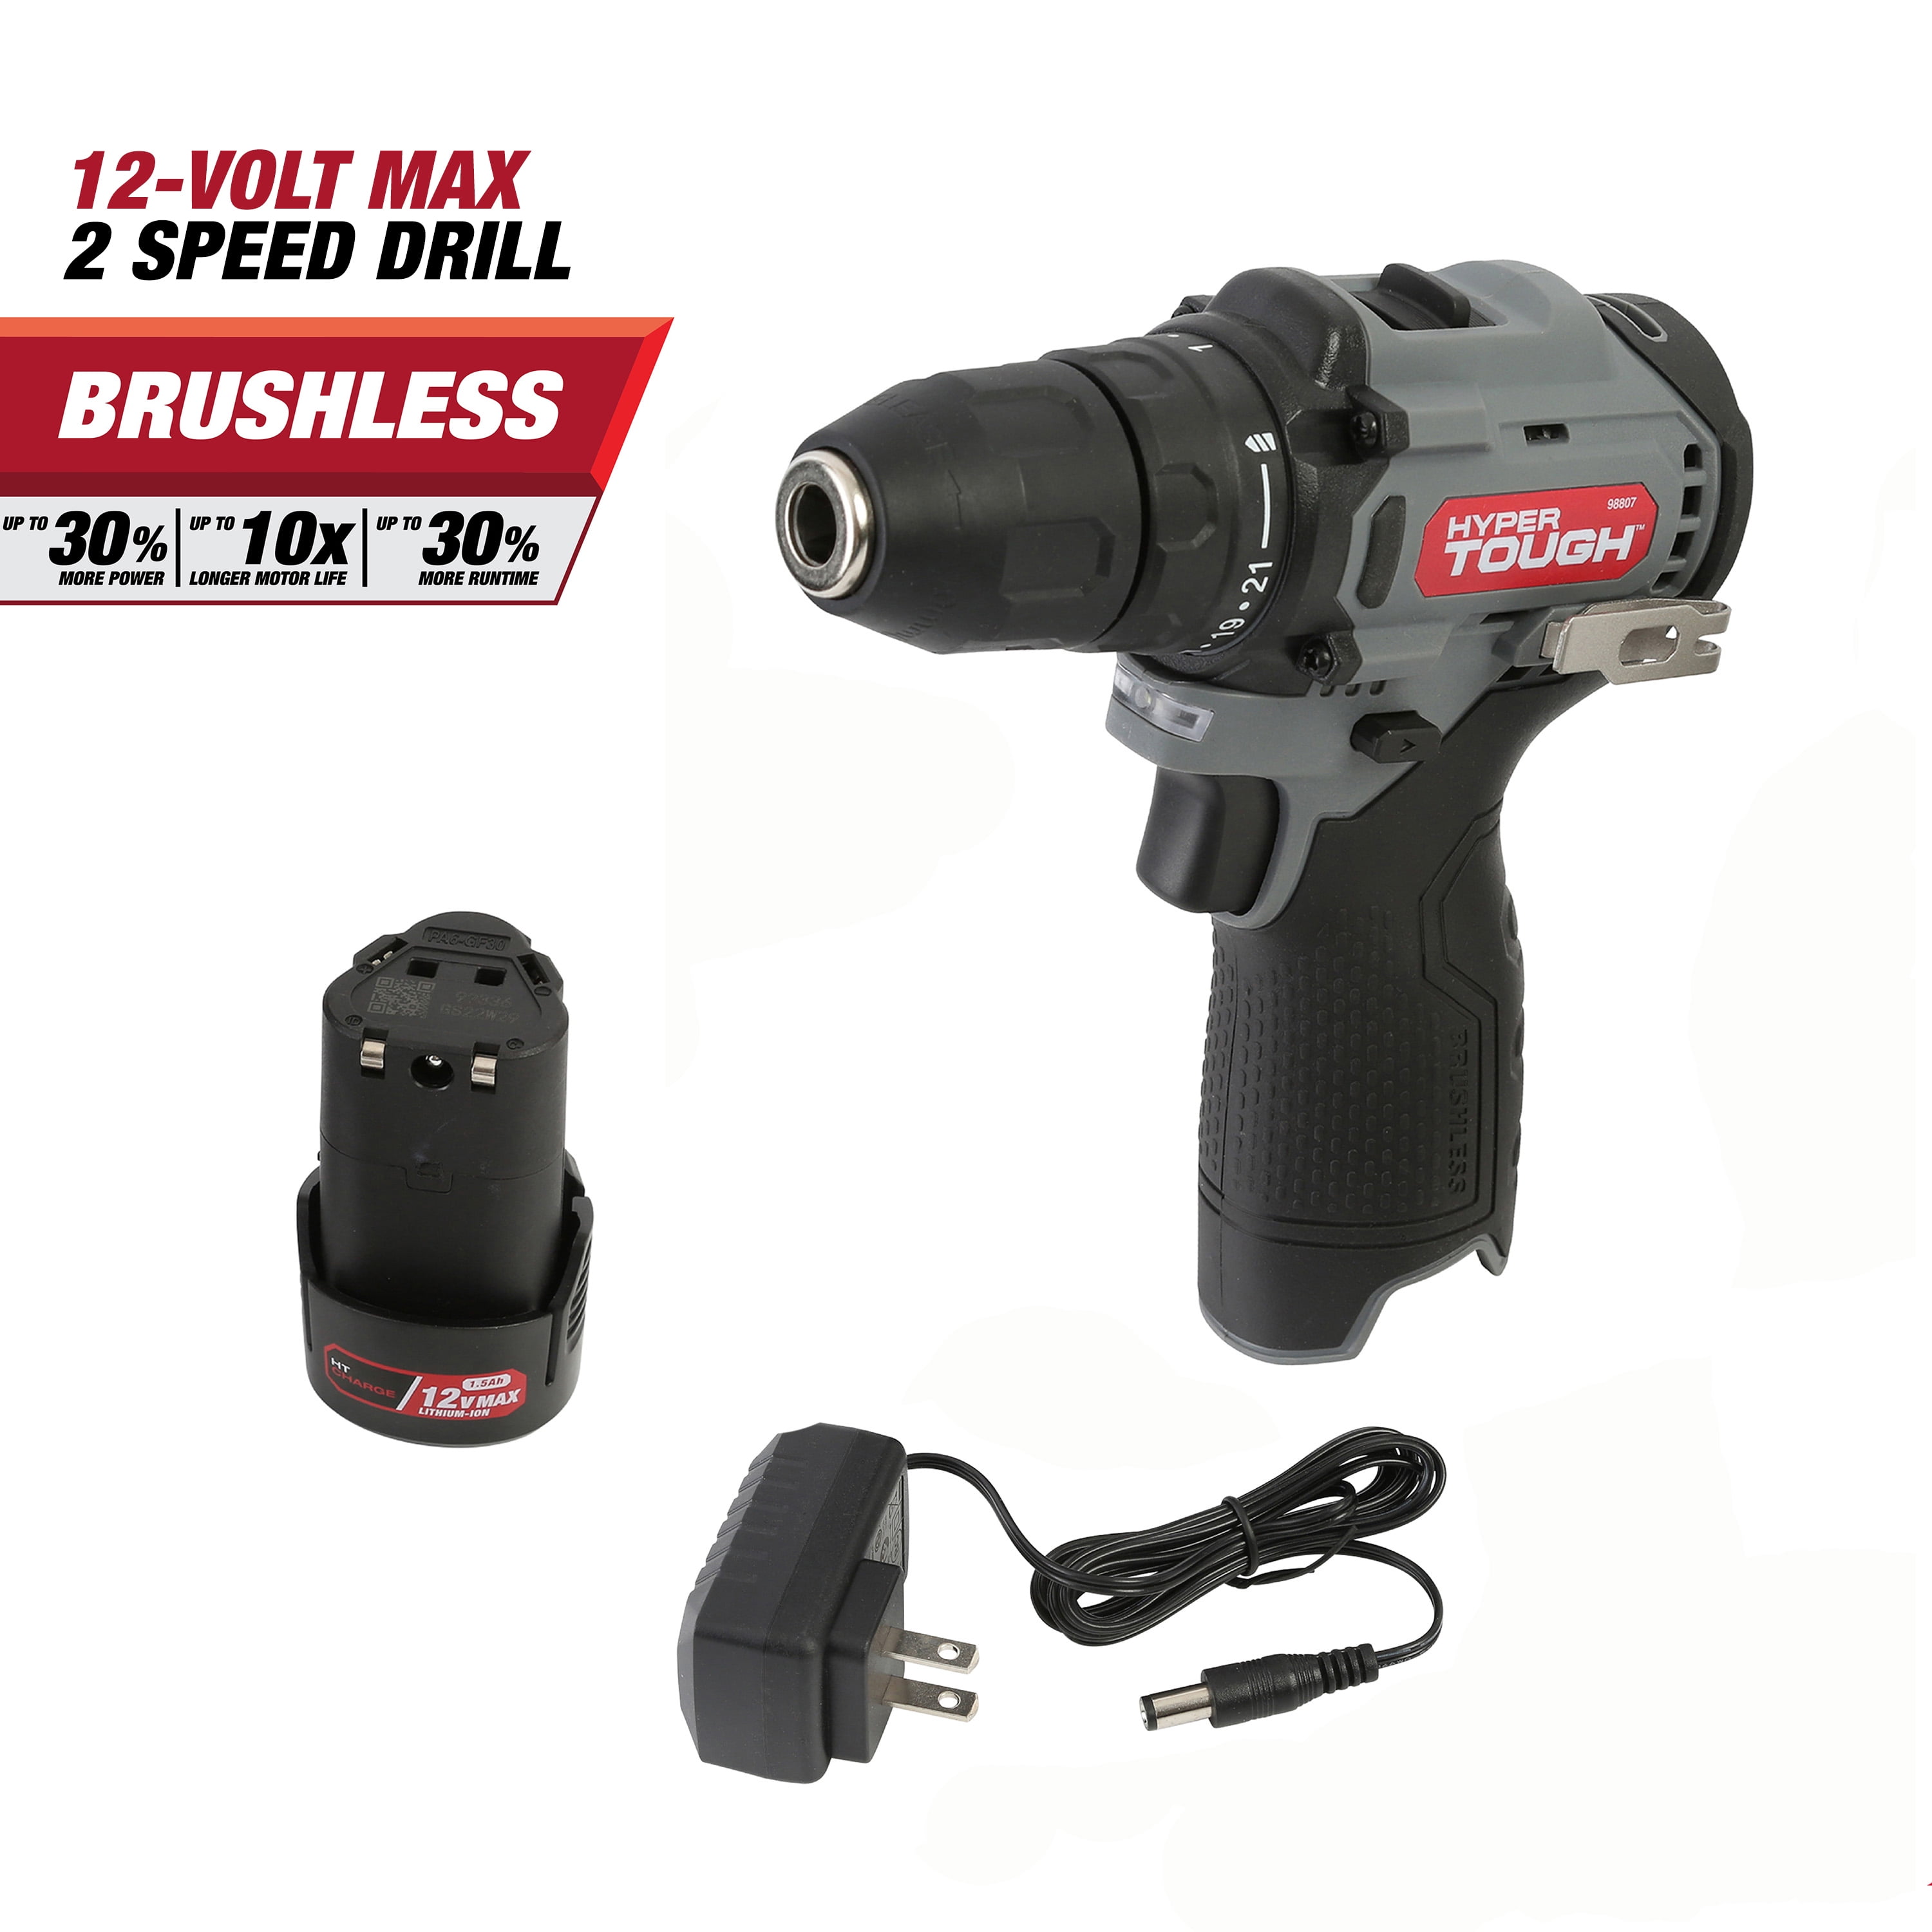 Hyper Tough 12V Max* Lithium-Ion Brushless 2-Speed 3/8-inch Drill Driver  with 1.5Ah Battery & Charger, Model 98807